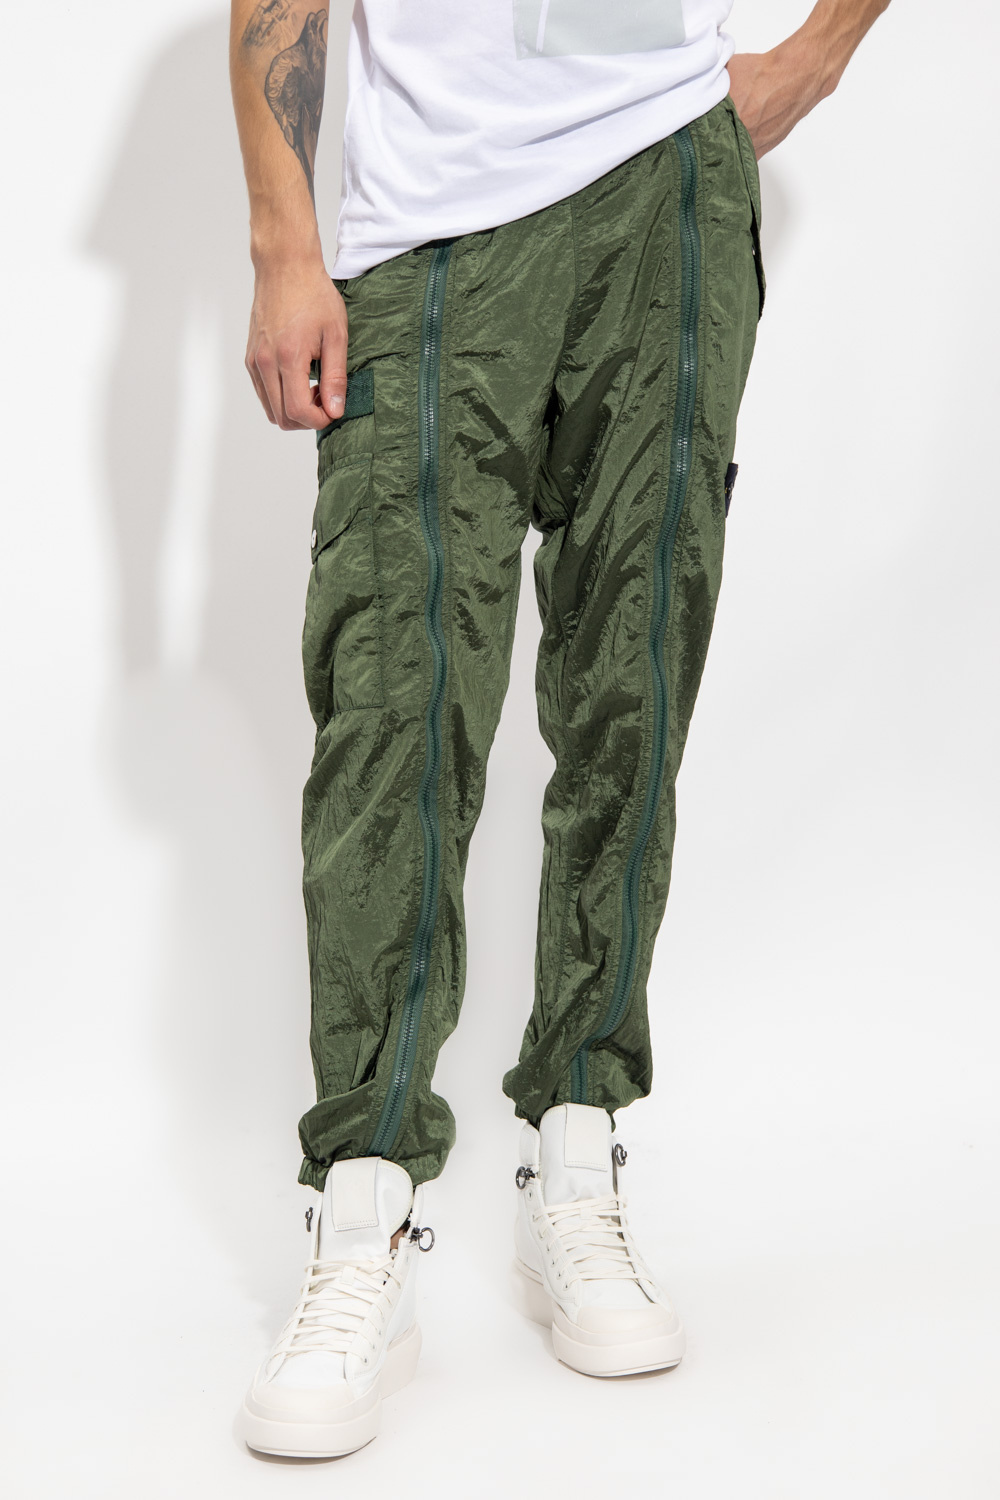 Stone Island trousers silver with logo